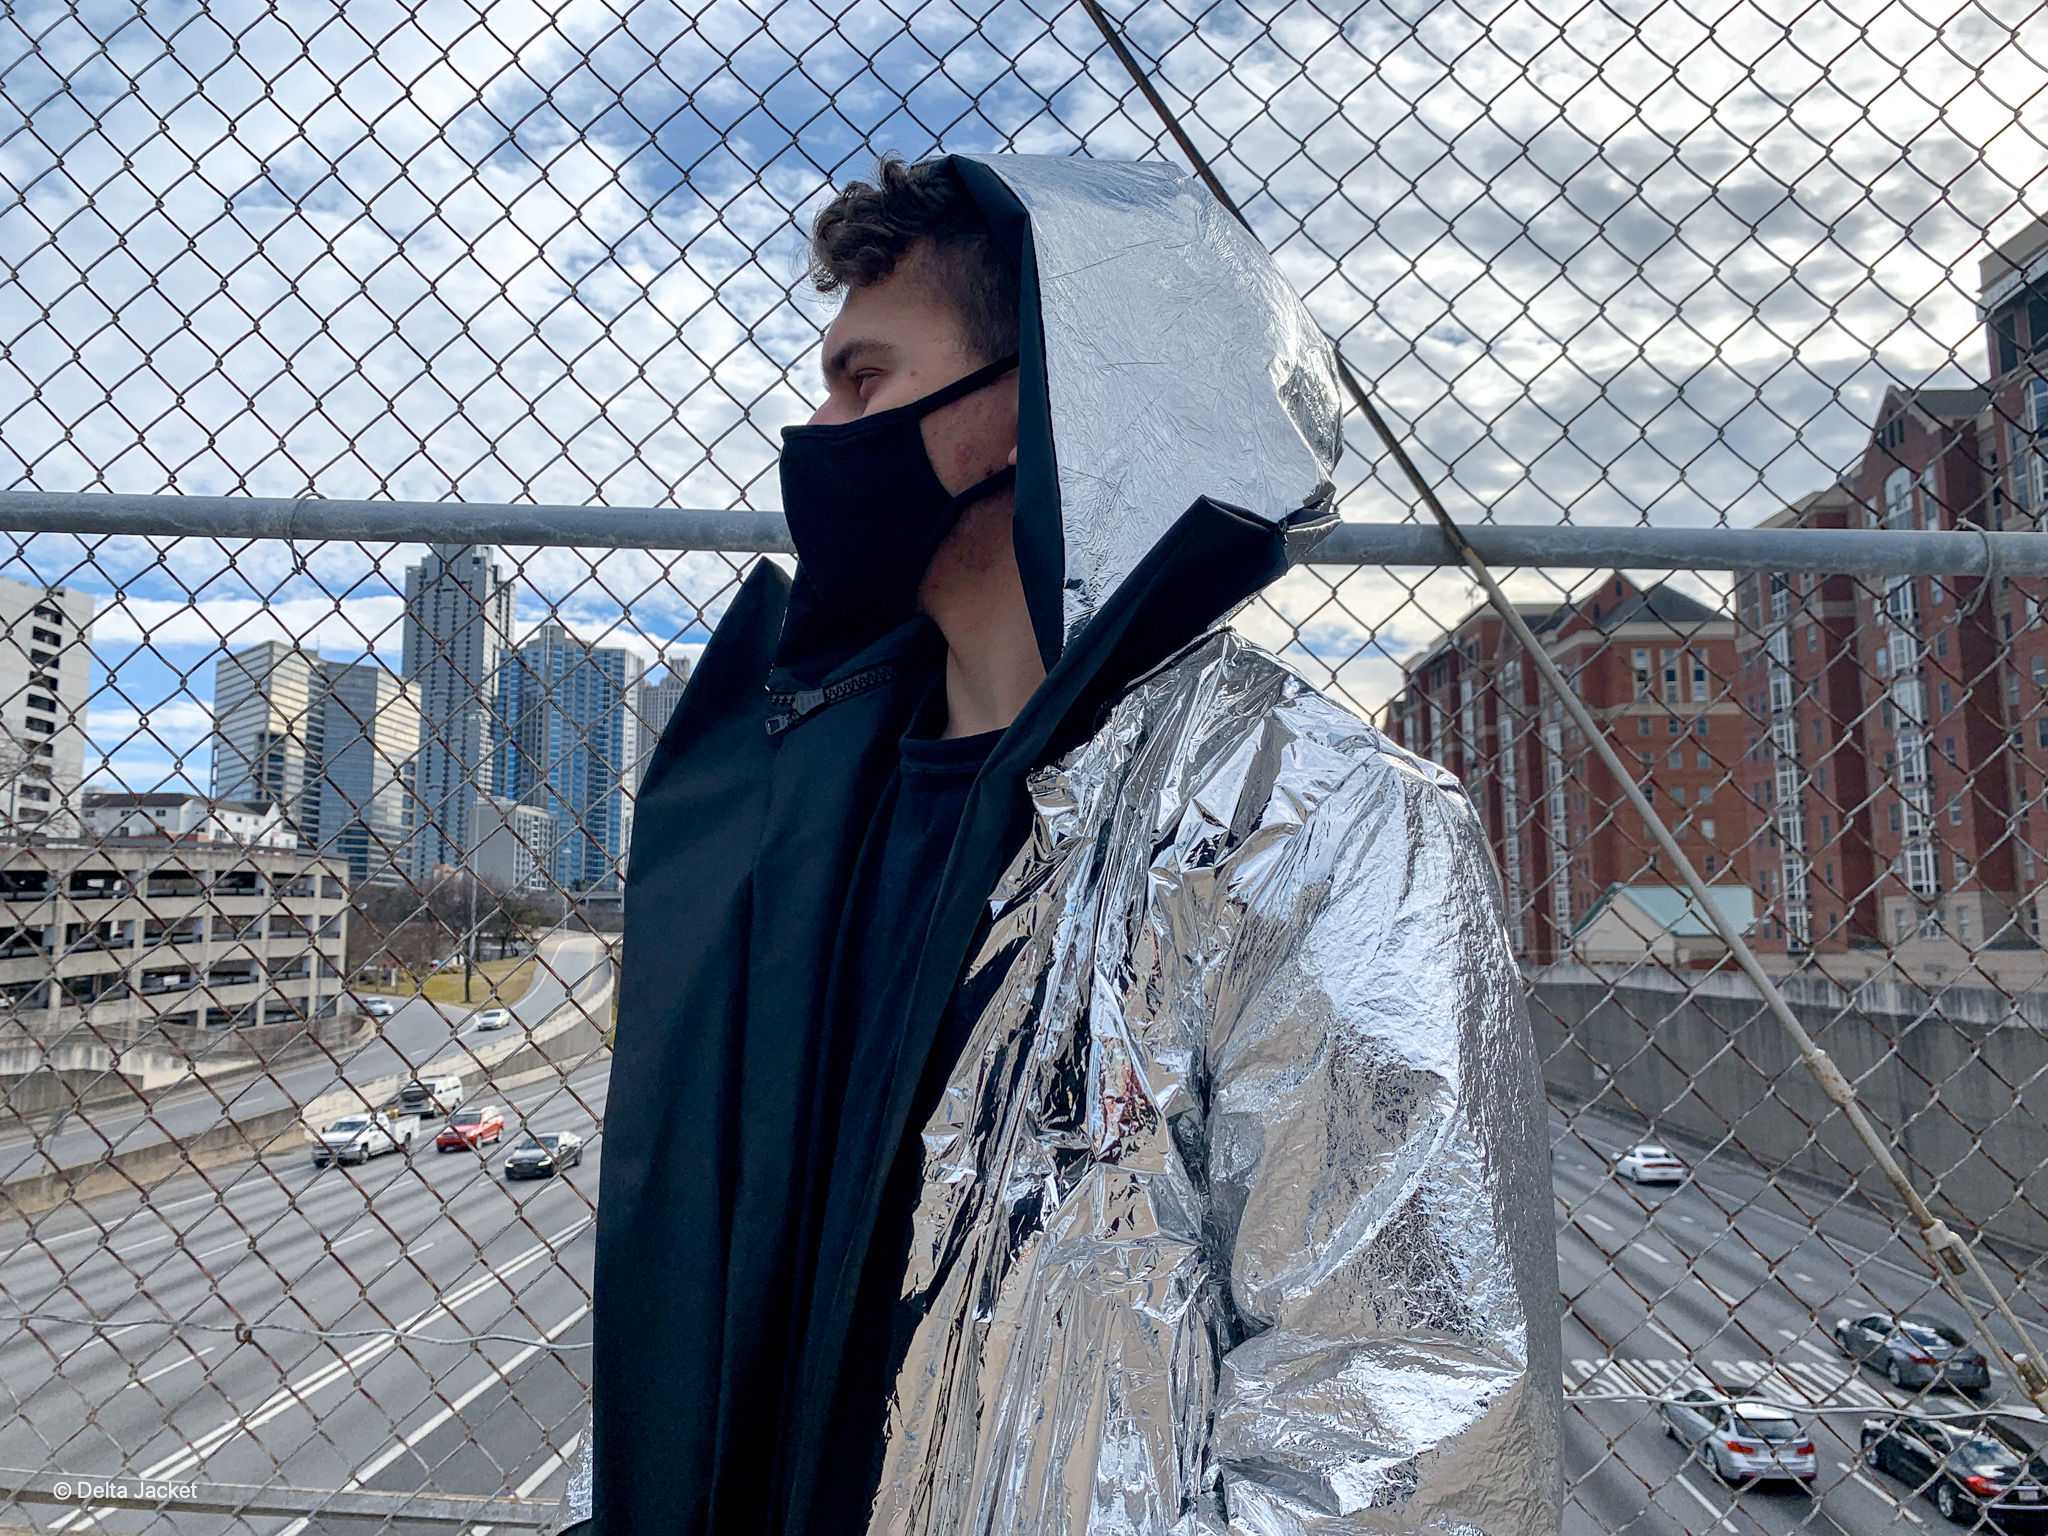 The winning invention is an inflatable, reversible, waterproof jacket that can be transformed into an air mattress or a shelter from the elements for homeless populations.